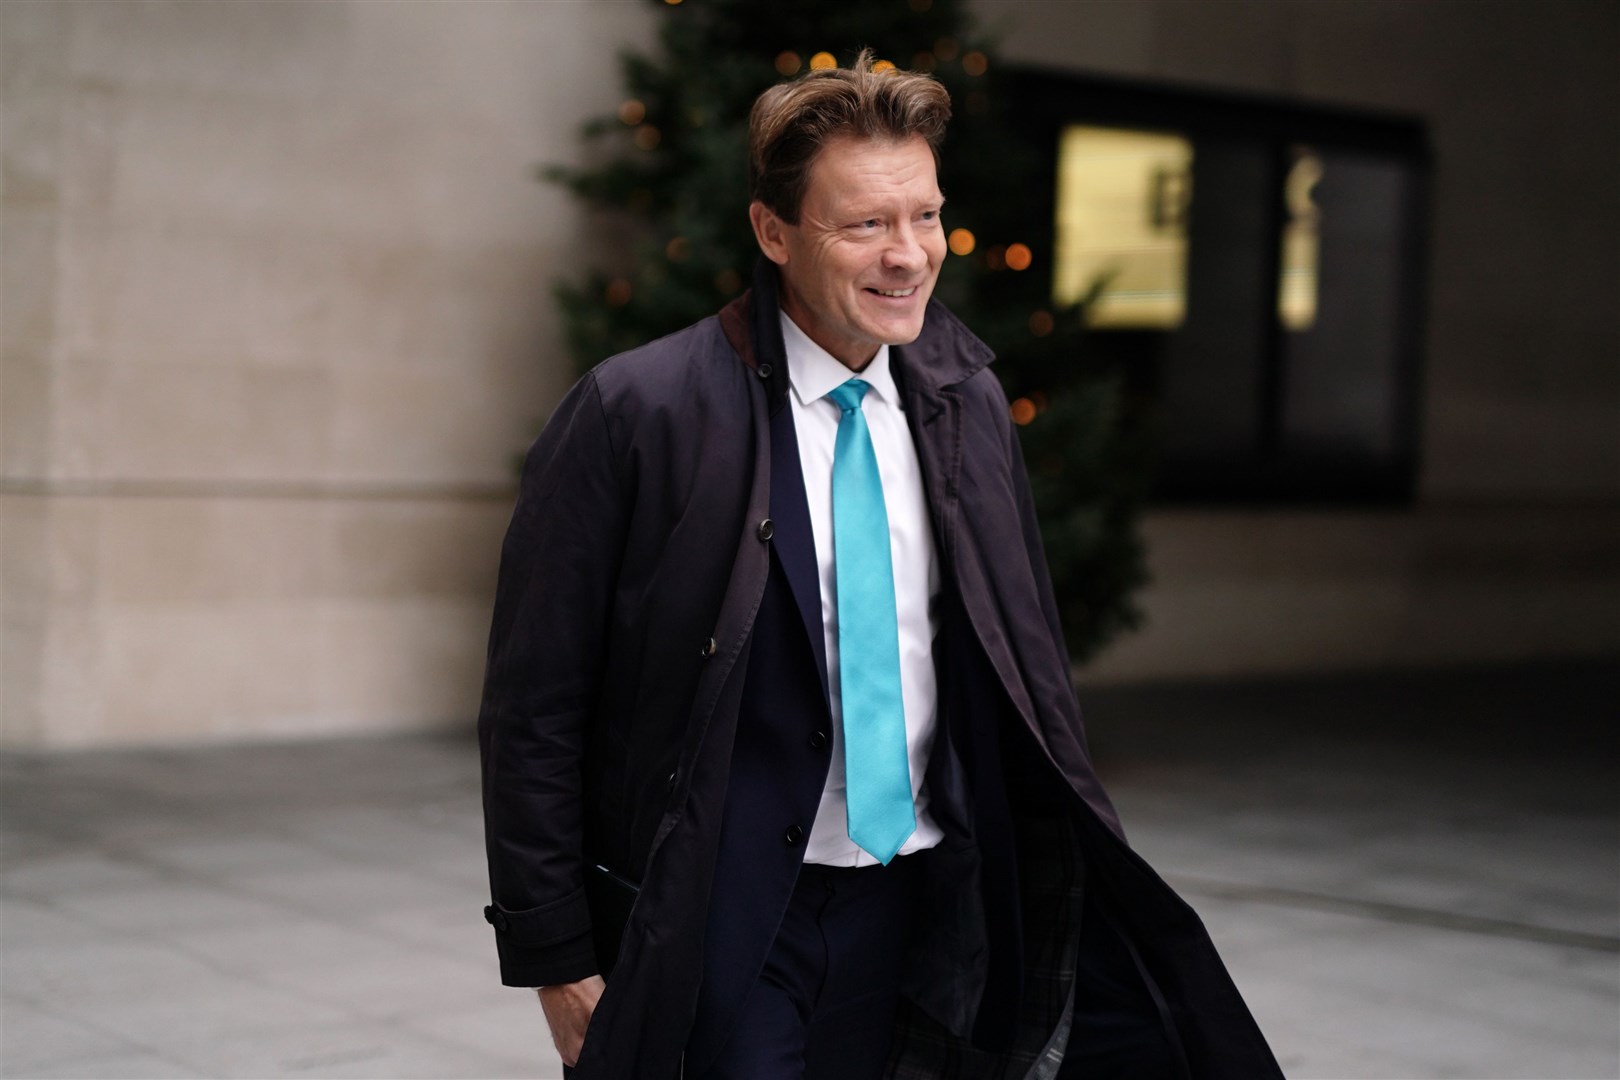 Reform UK leader Richard Tice has denied offering ‘cash or money’ to Tory MPs to join his party (Jordan Pettitt/PA)